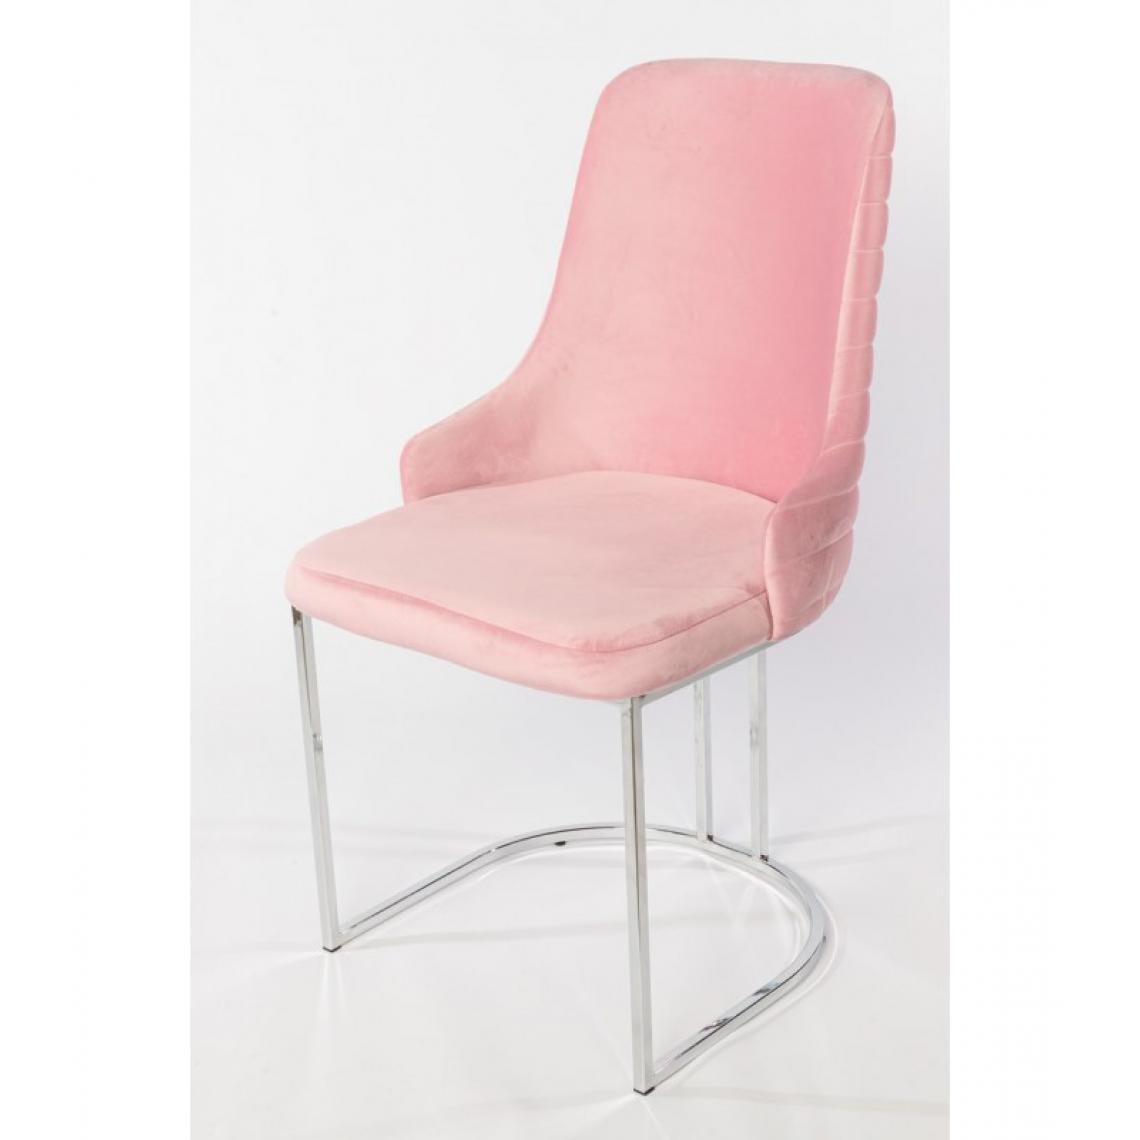 Protocole Home - Chaise Design Karl Rose - Chaises